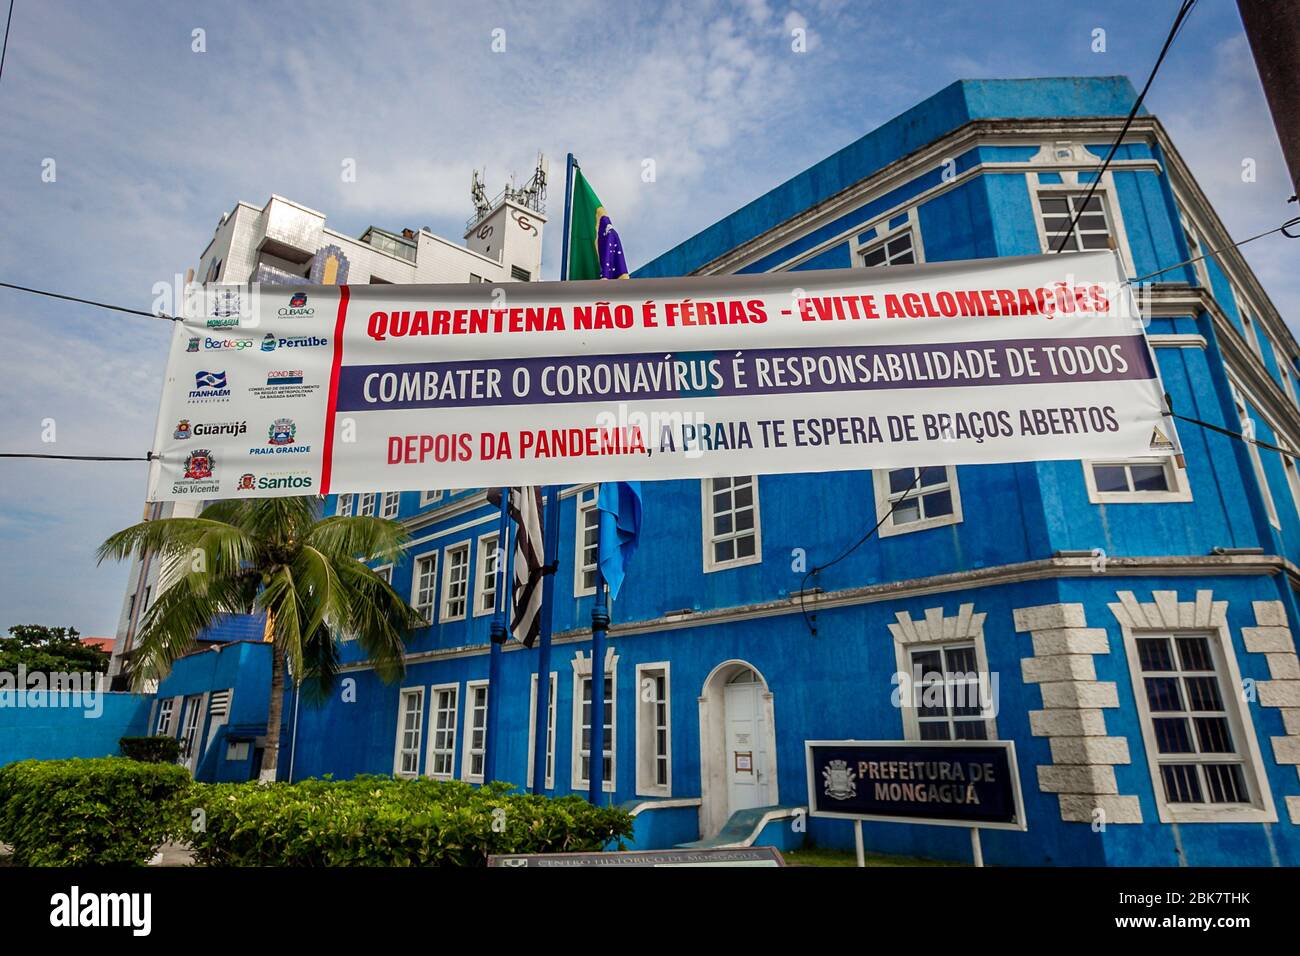 MONGAGUÁ, SP - 02.05.2020: CARTAZ DE COMBATE AO COVID 19 EM MONGAGUÁ - Mongaguá City Hall places a sign in front of the building to raise awareness of the quarantine population. The beaches of the coast of the state of São Paulo remain closed to bather during the extended holiday of the work day. The action aims to prevent contamination by the new coronavirus (Covid-19). (Photo: Antonio Molina/Fotoarena) Stock Photo